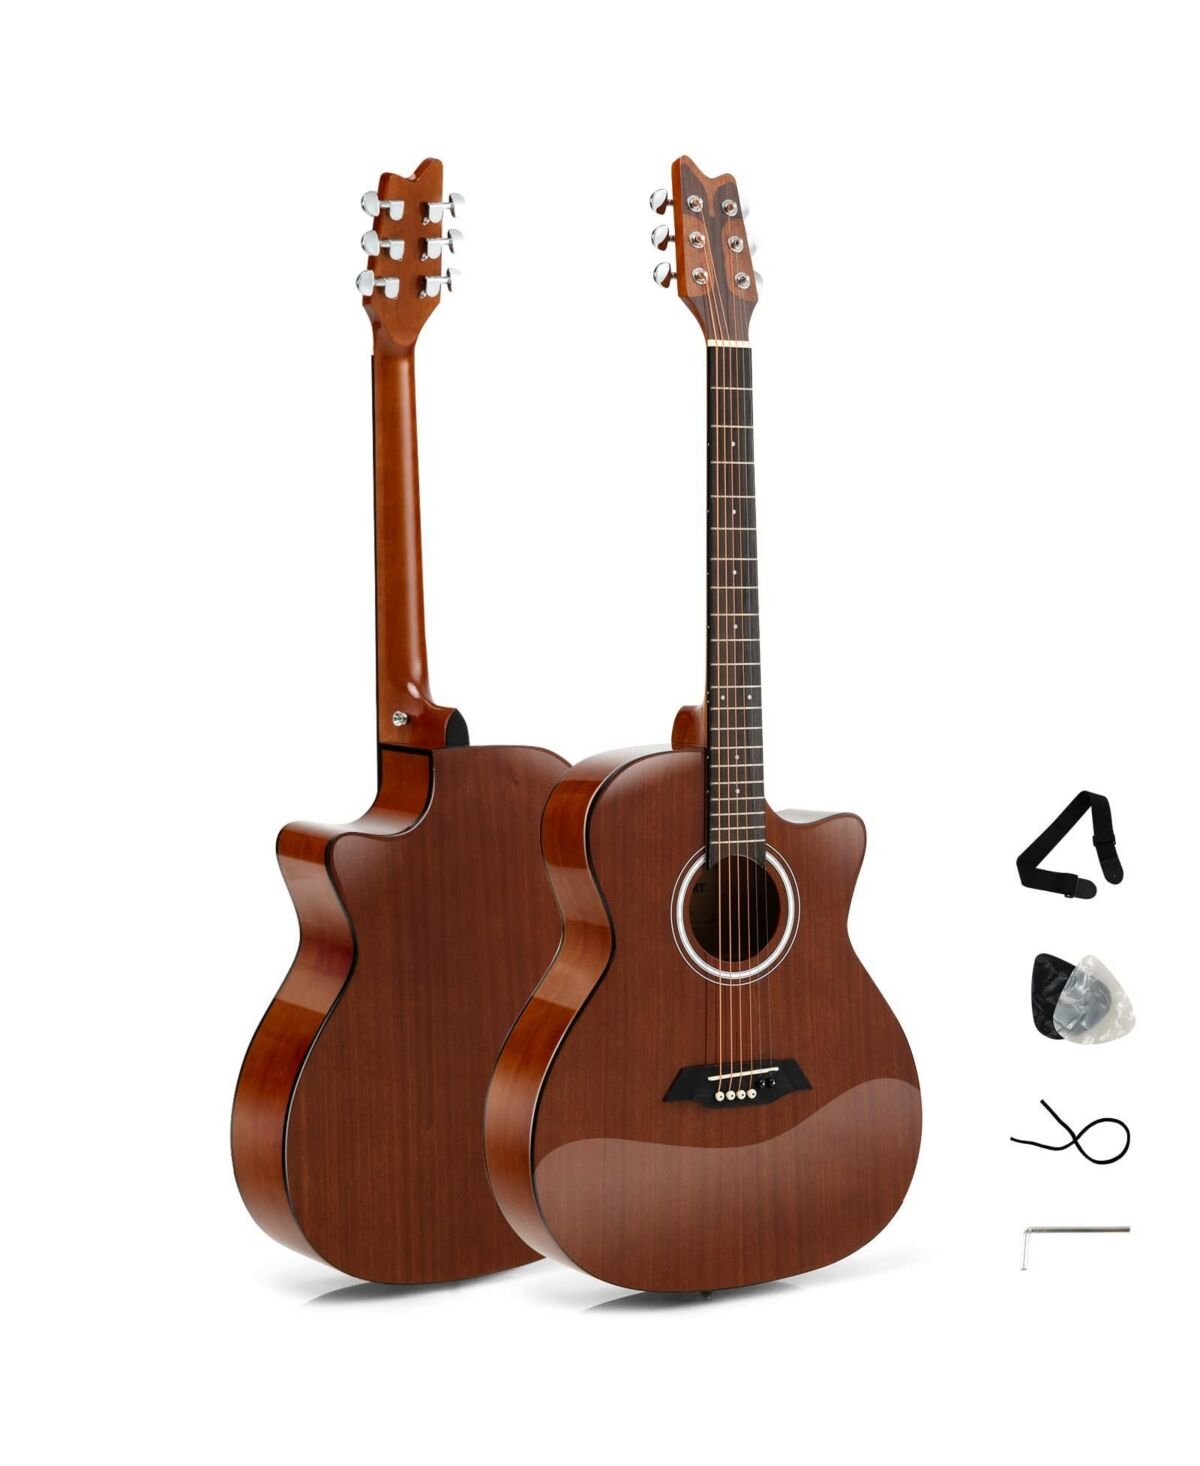 Sugift 41 Inch Full Size Acoustic Guitar with Sapele Body Strap Picks